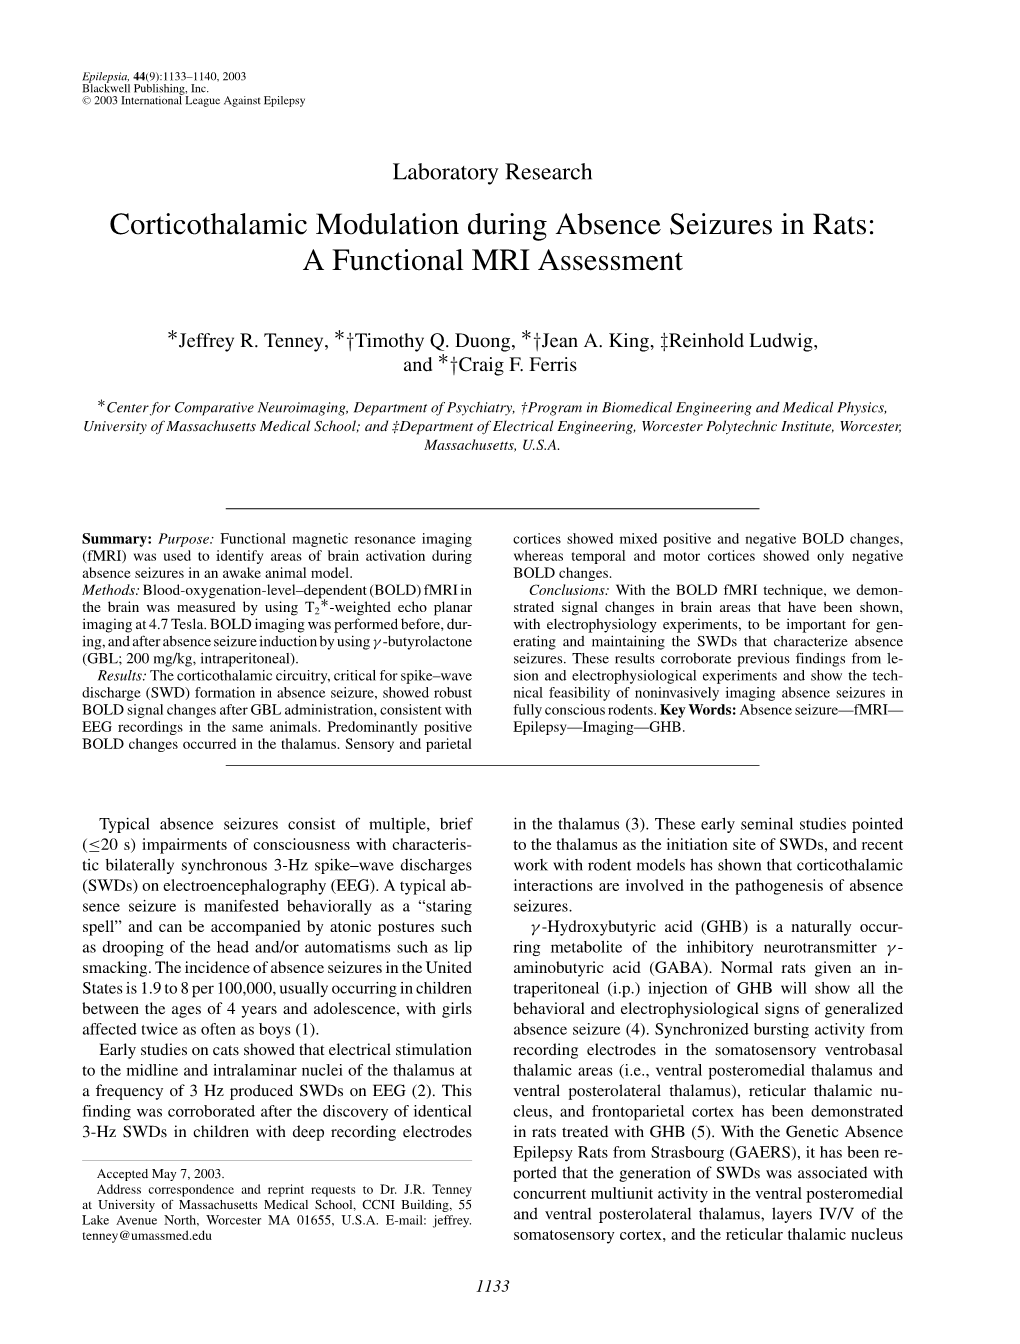 Corticothalamic Modulation During Absence Seizures in Rats: a Functional MRI Assessment